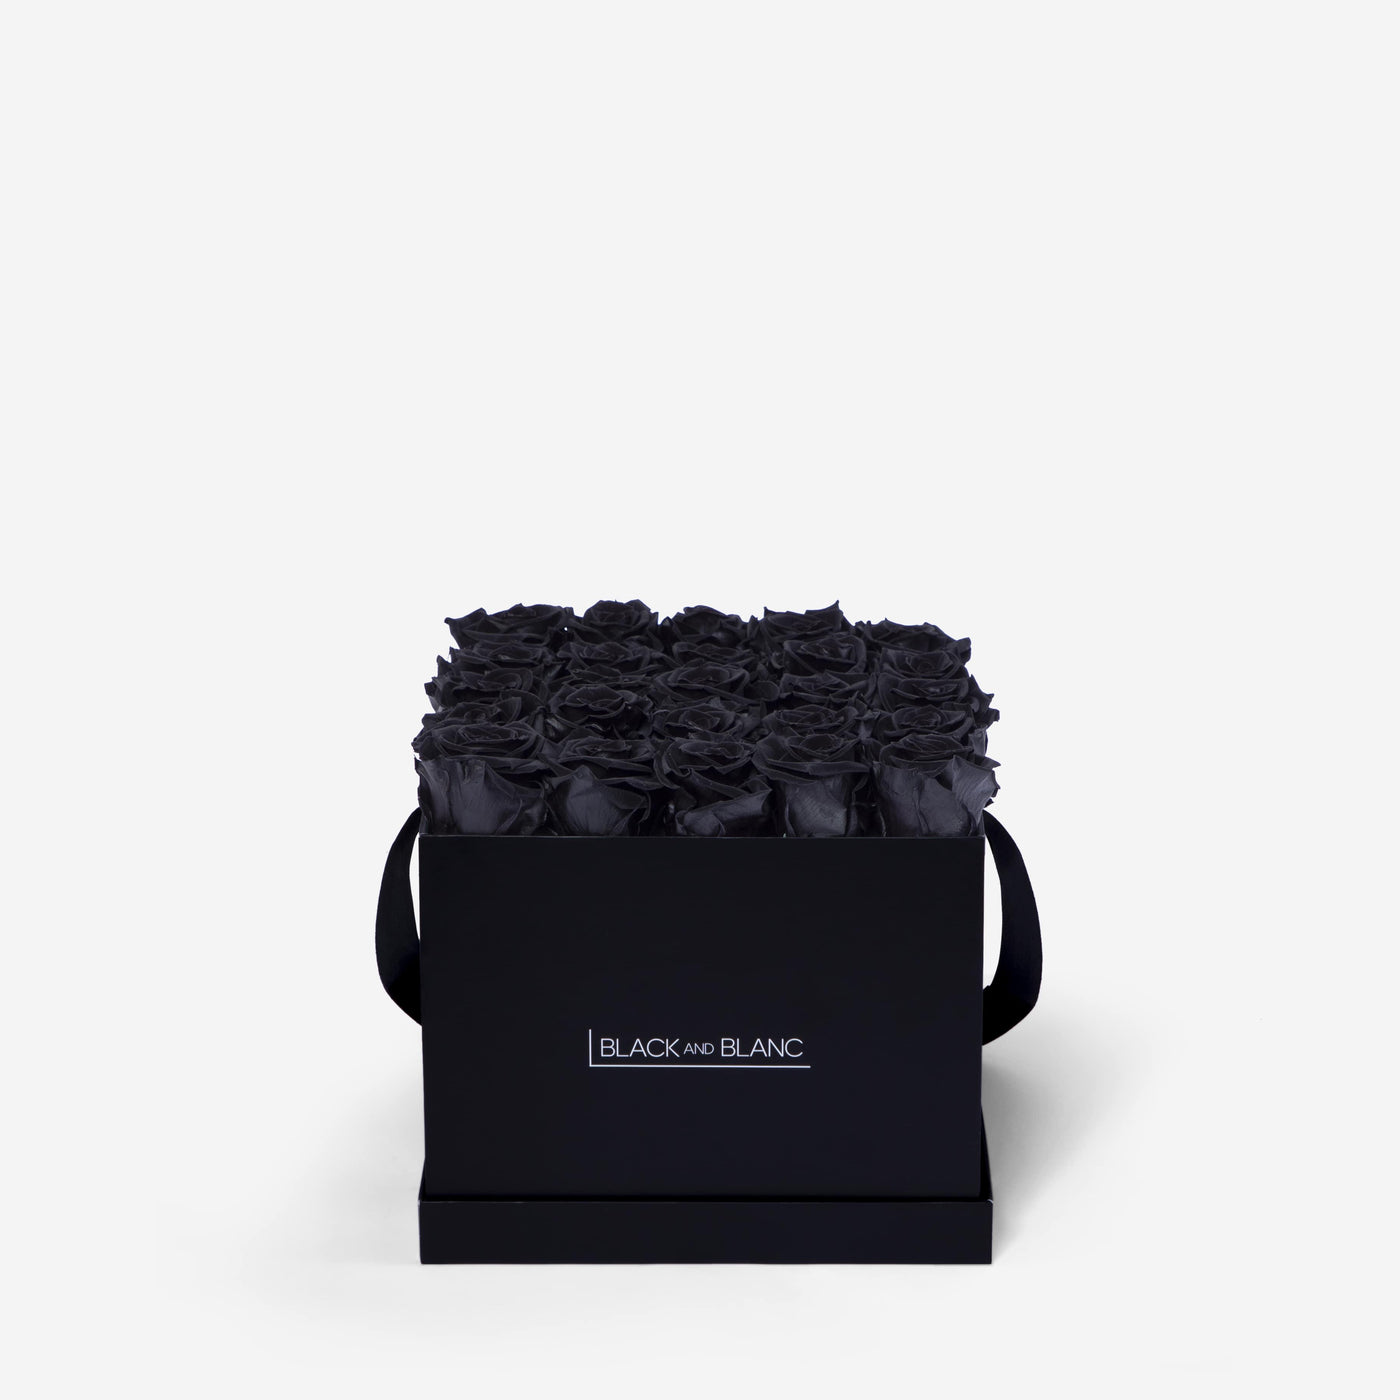 Black Square Infinity - Infinity Roses - BLACK AND BLANC